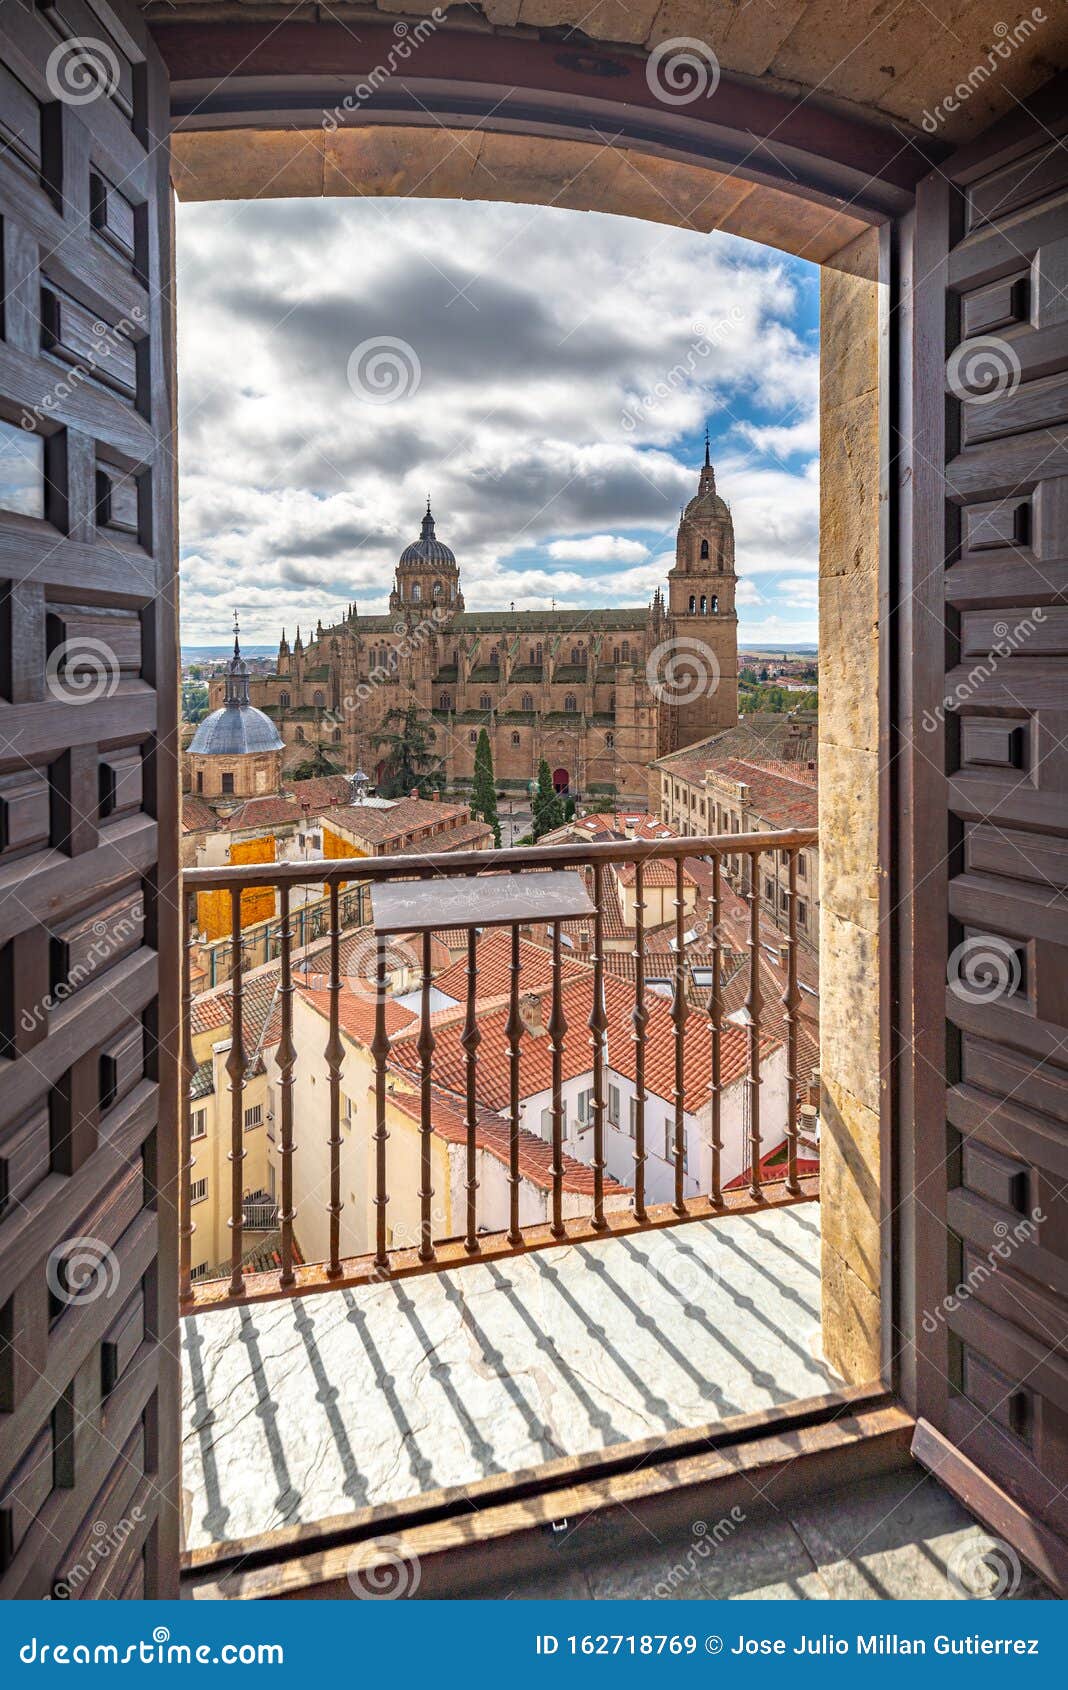 salamanca pontifical university shot from the cathedral roof